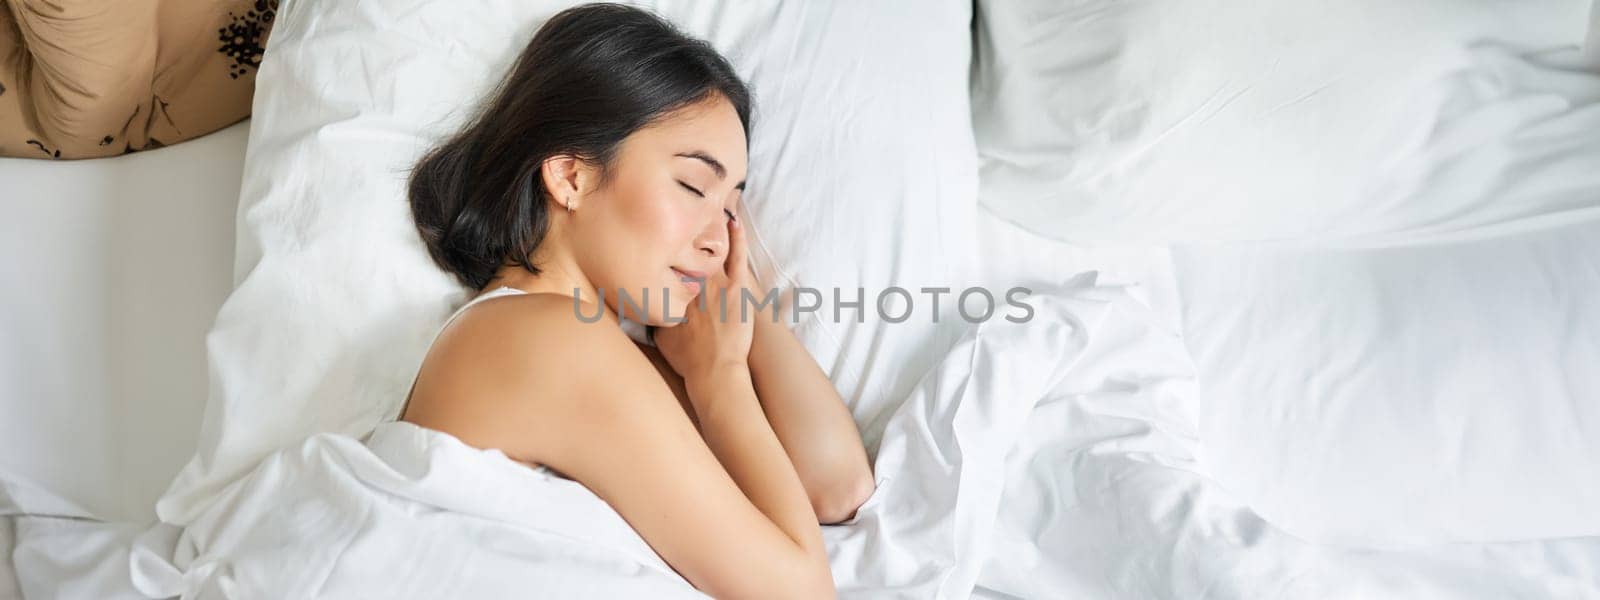 Top view image of asian woman sleeping alone in king size bed on white pillows. Young girl lying in her bedroom with eyes closed, morning sunlight shines in room.